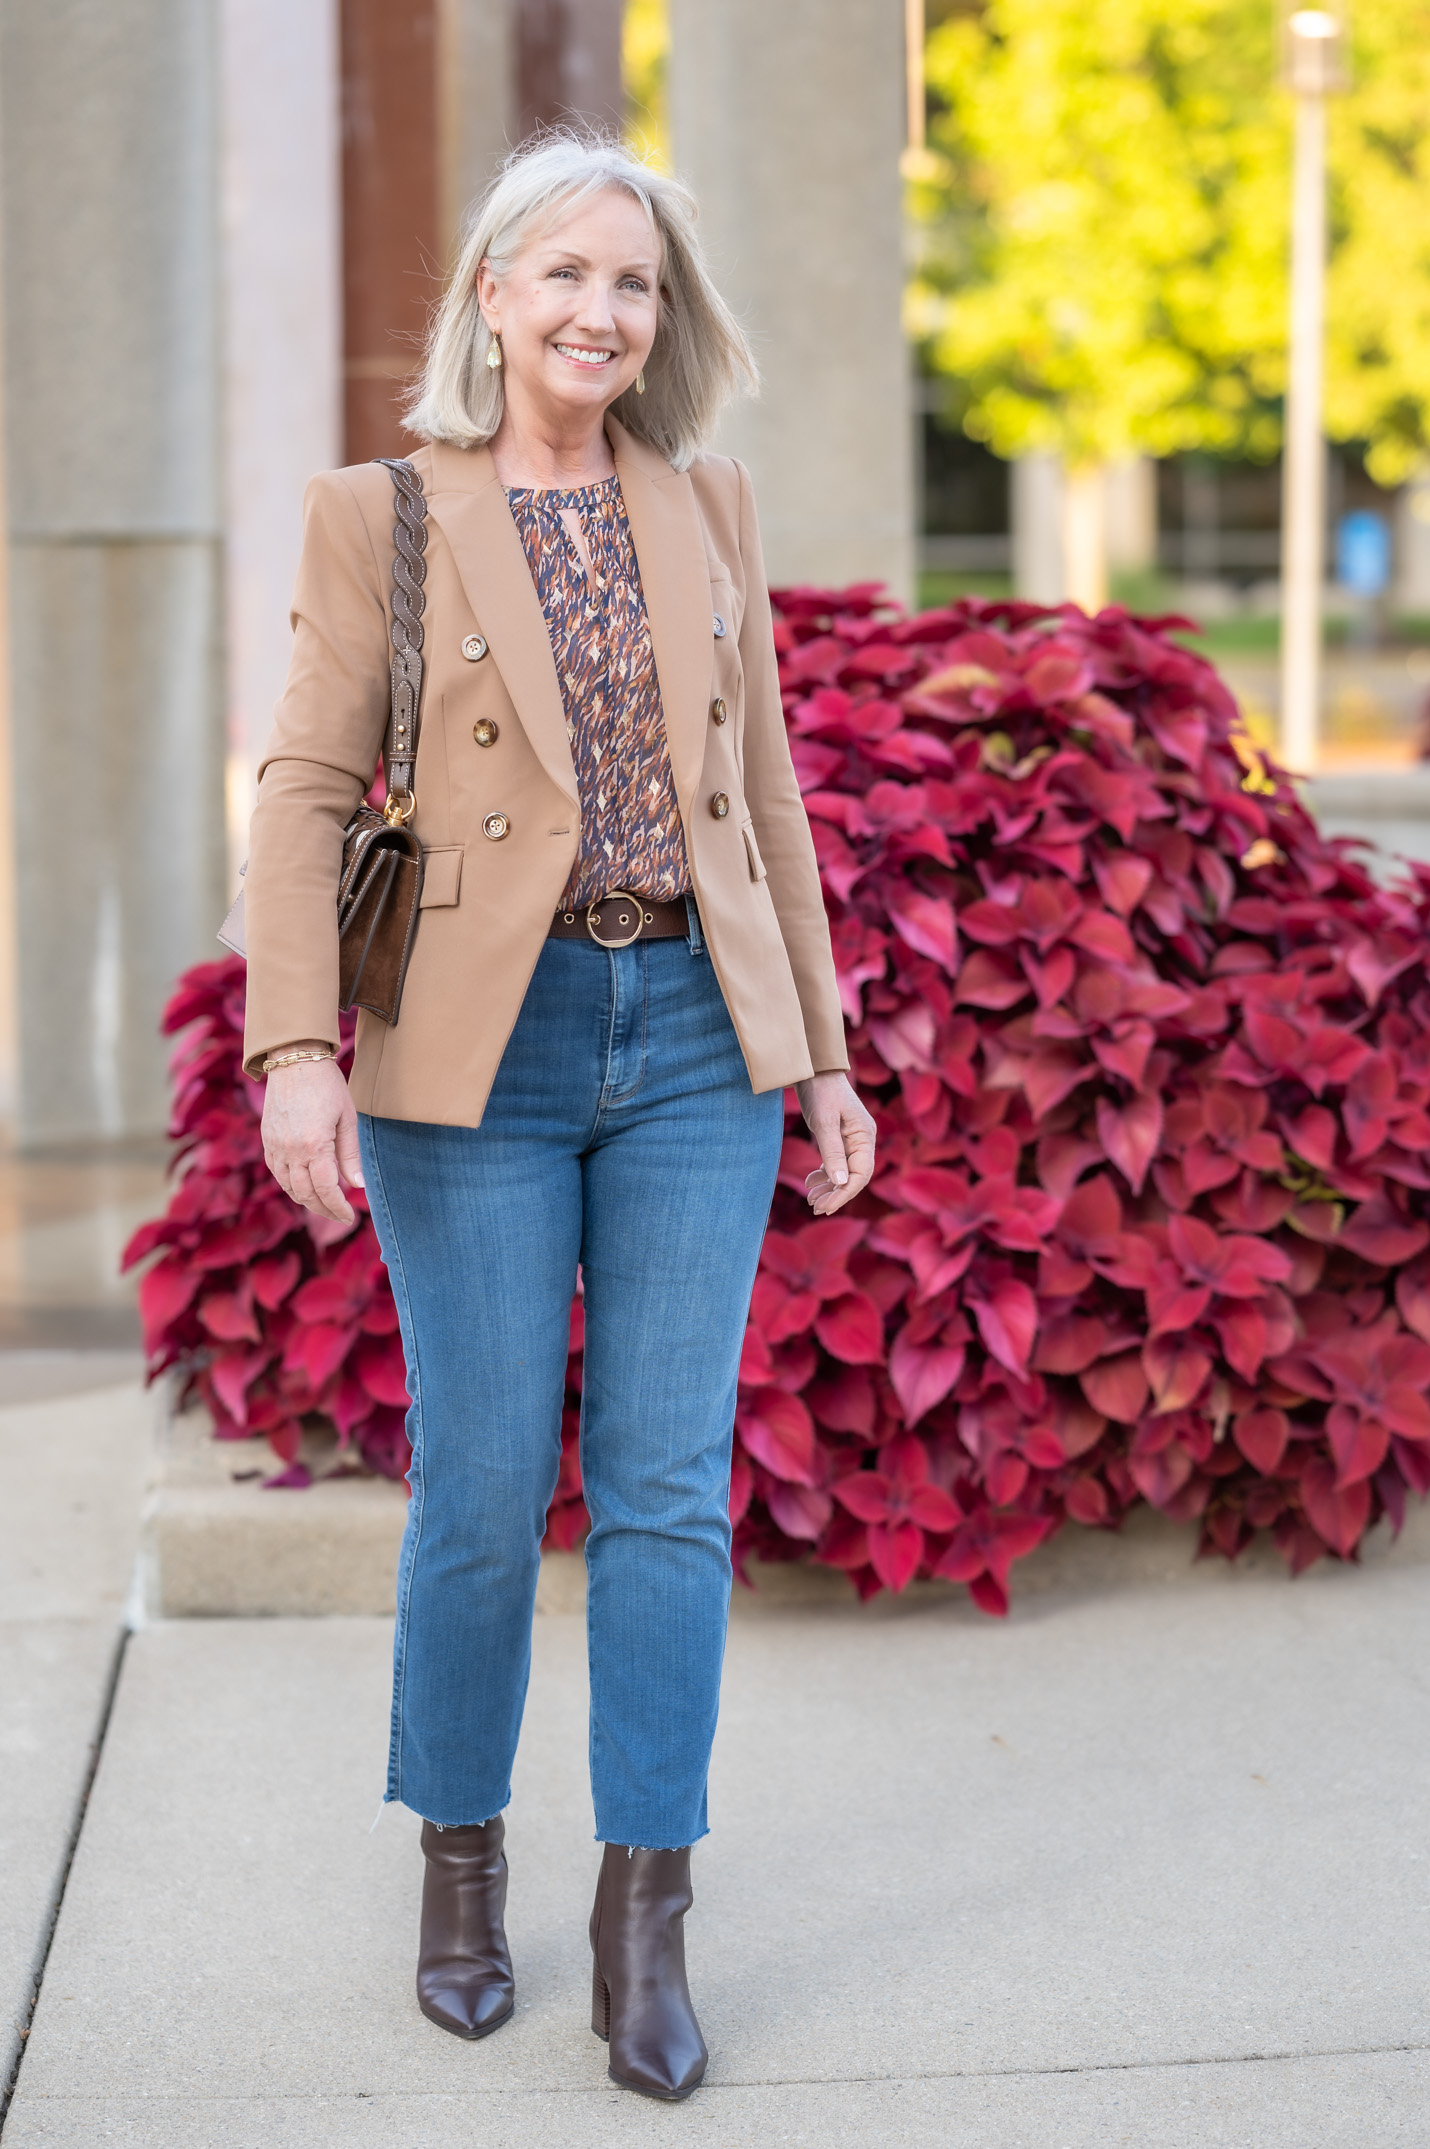 Blouse and Jeans with Blazer in Fall